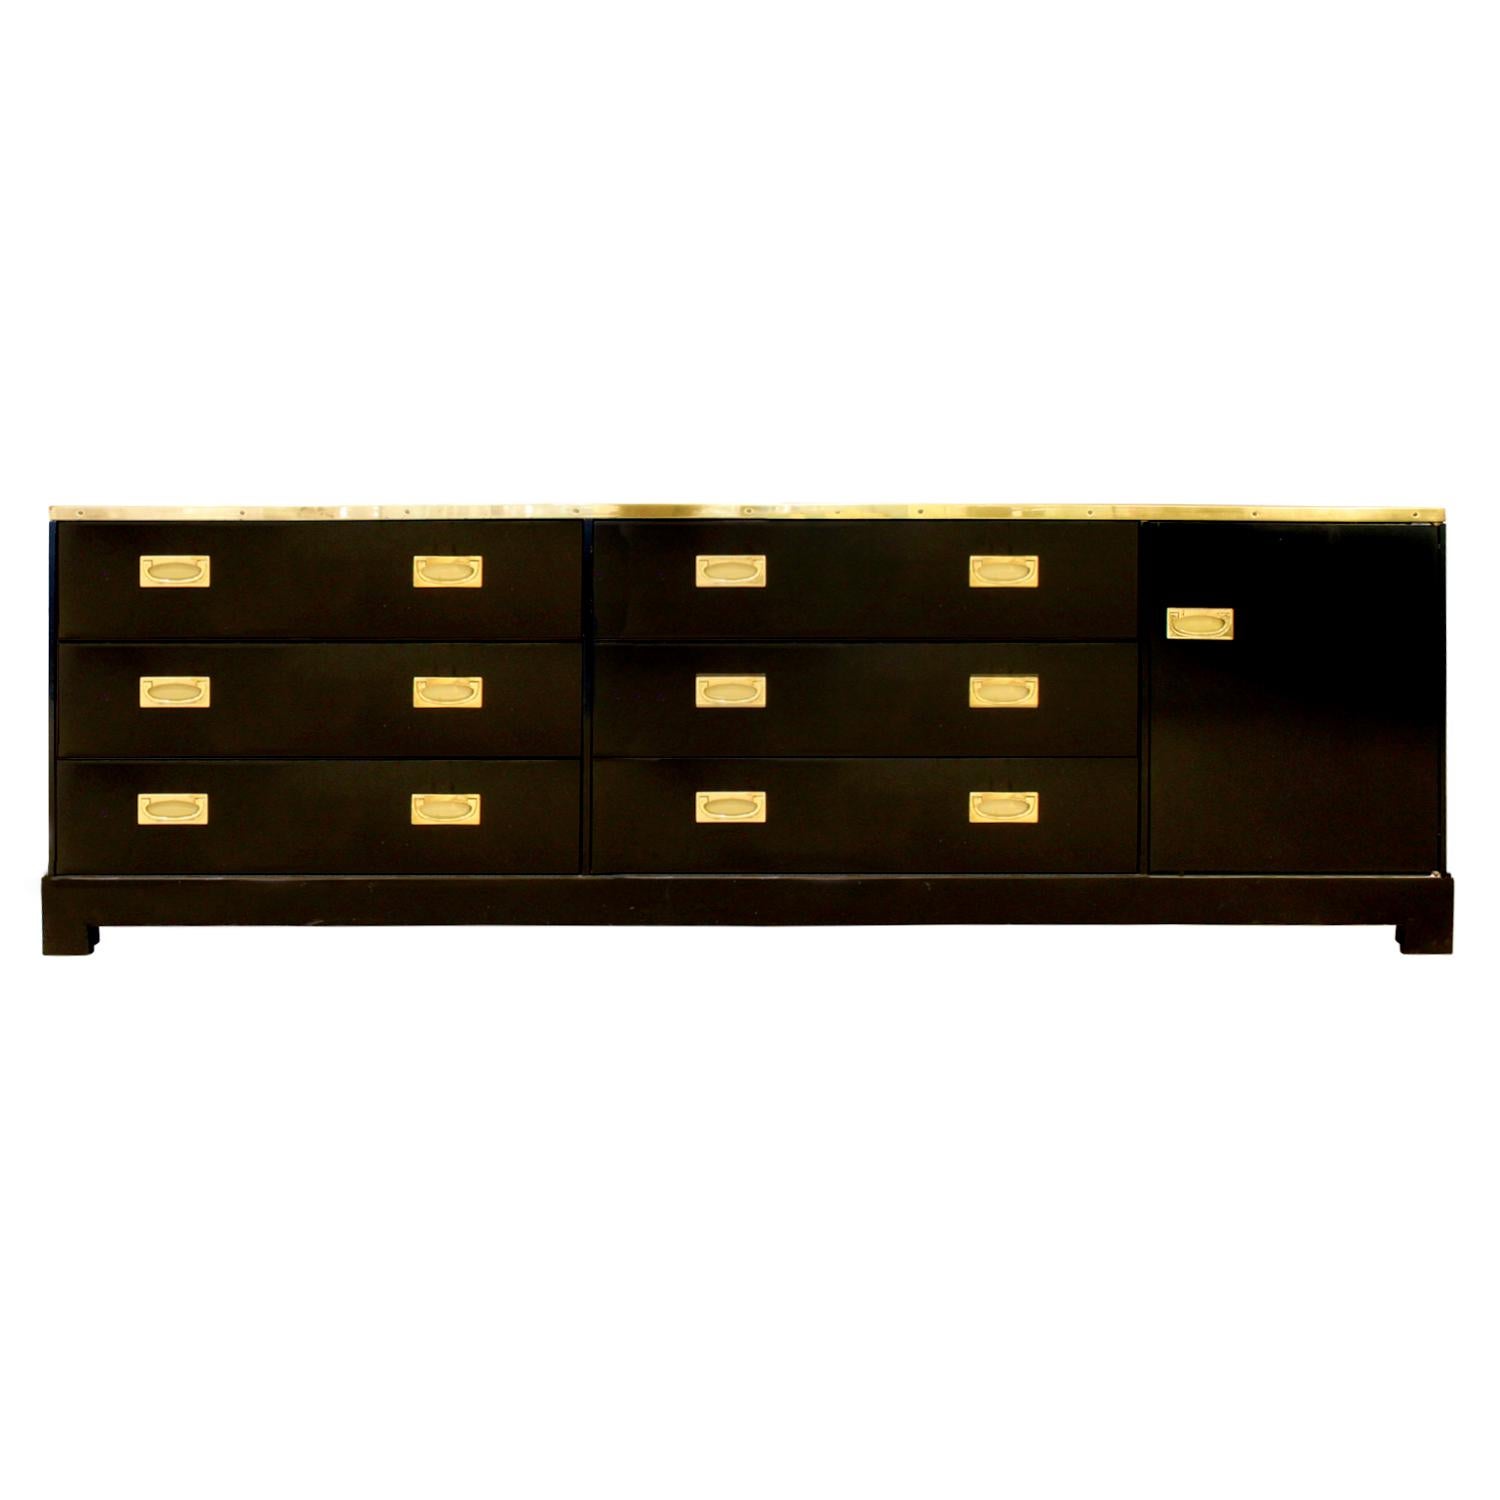 Elegant chest of drawer in black lacquer with brass banding and pulls attributed to Alain Delon for Maison Jansen, France, 1970s. This chest of drawers is beautifully made and very chic.